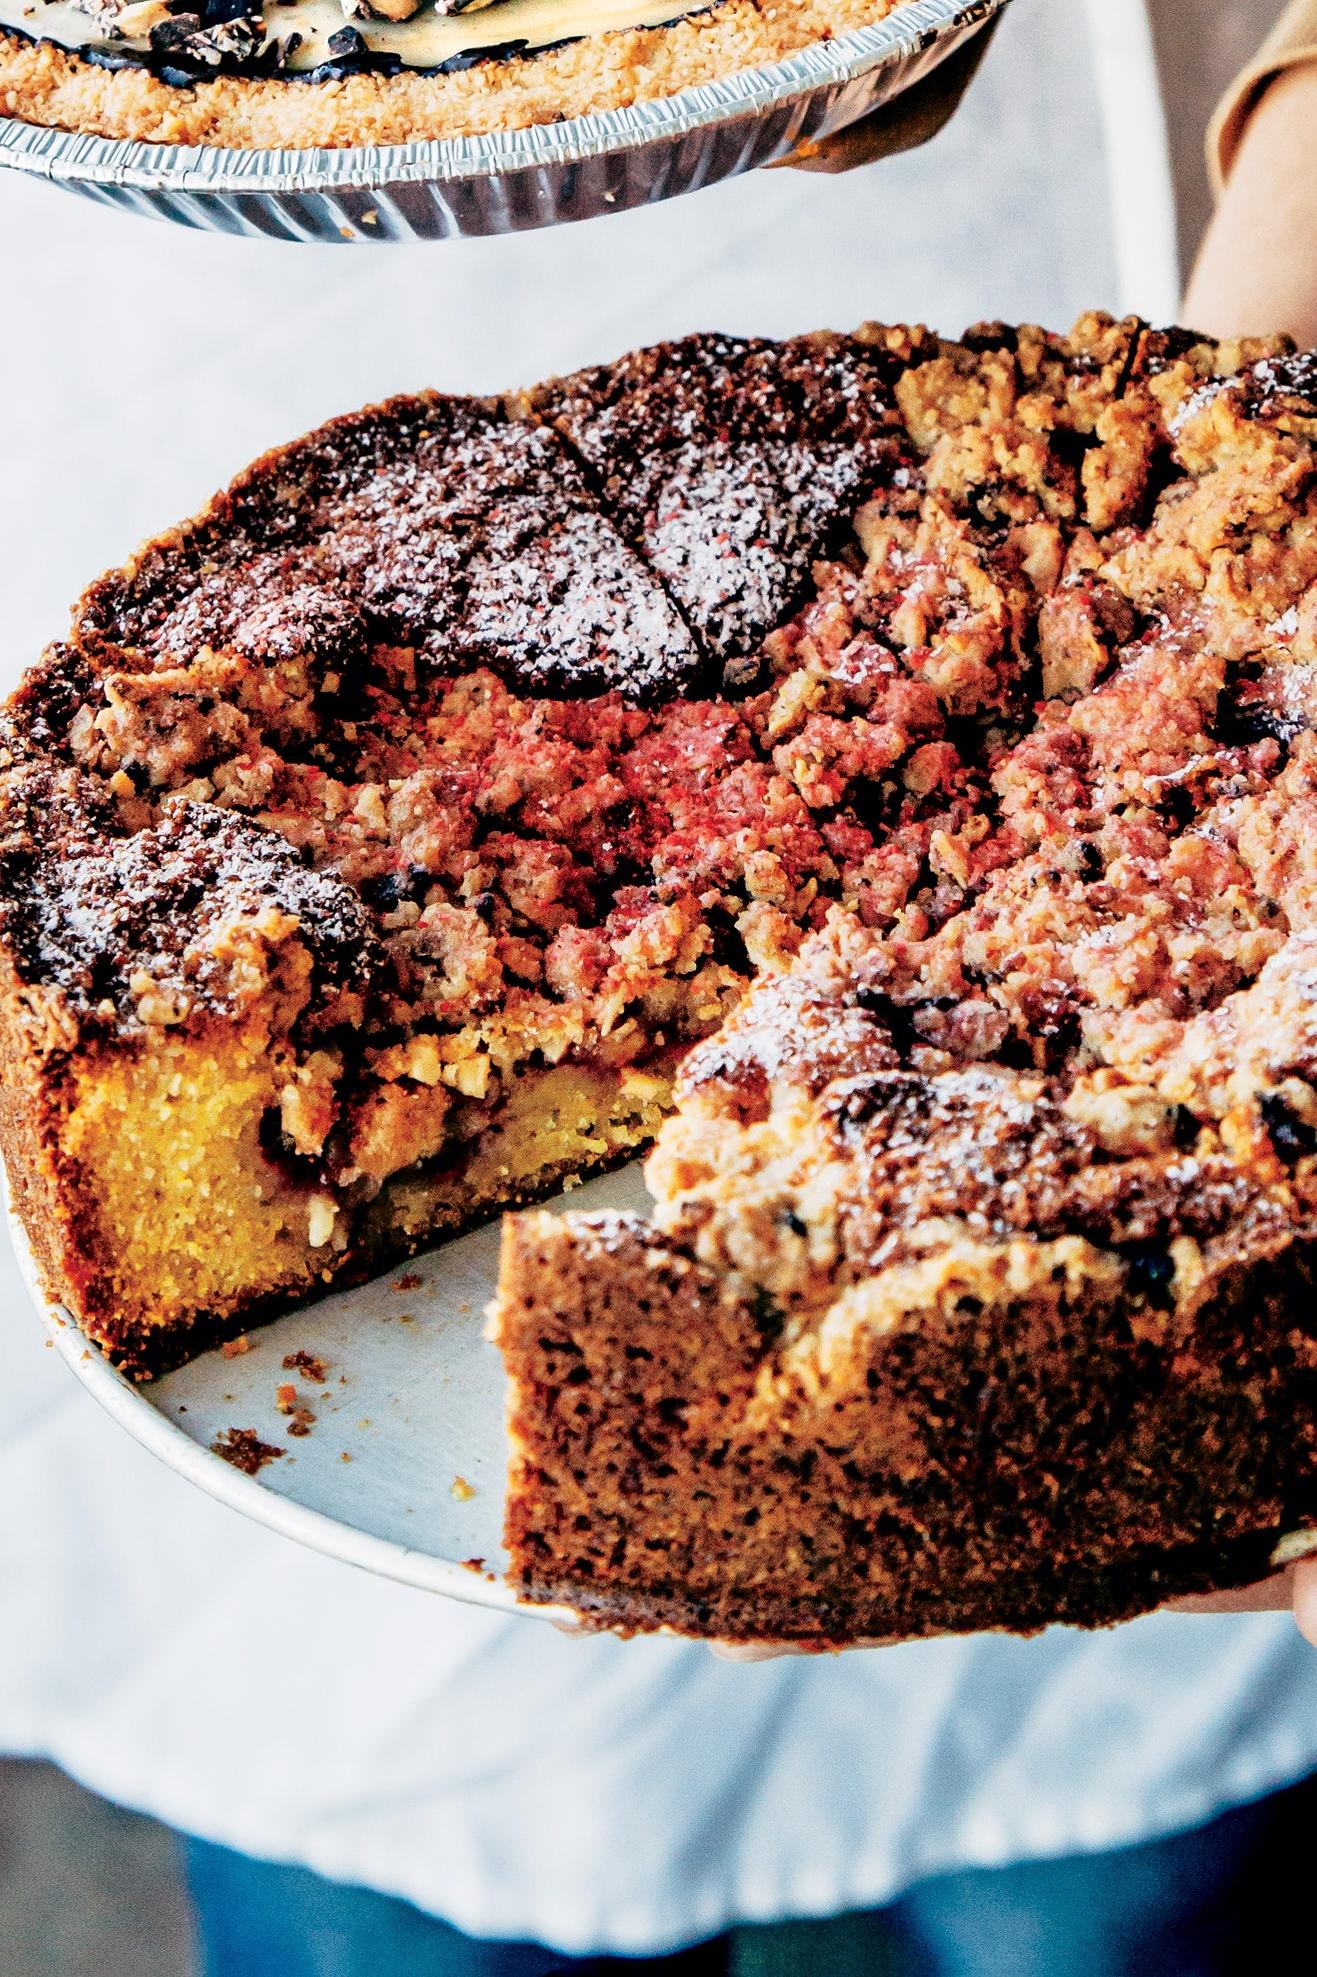  Satisfy your sweet tooth with this irresistible coffee cake.